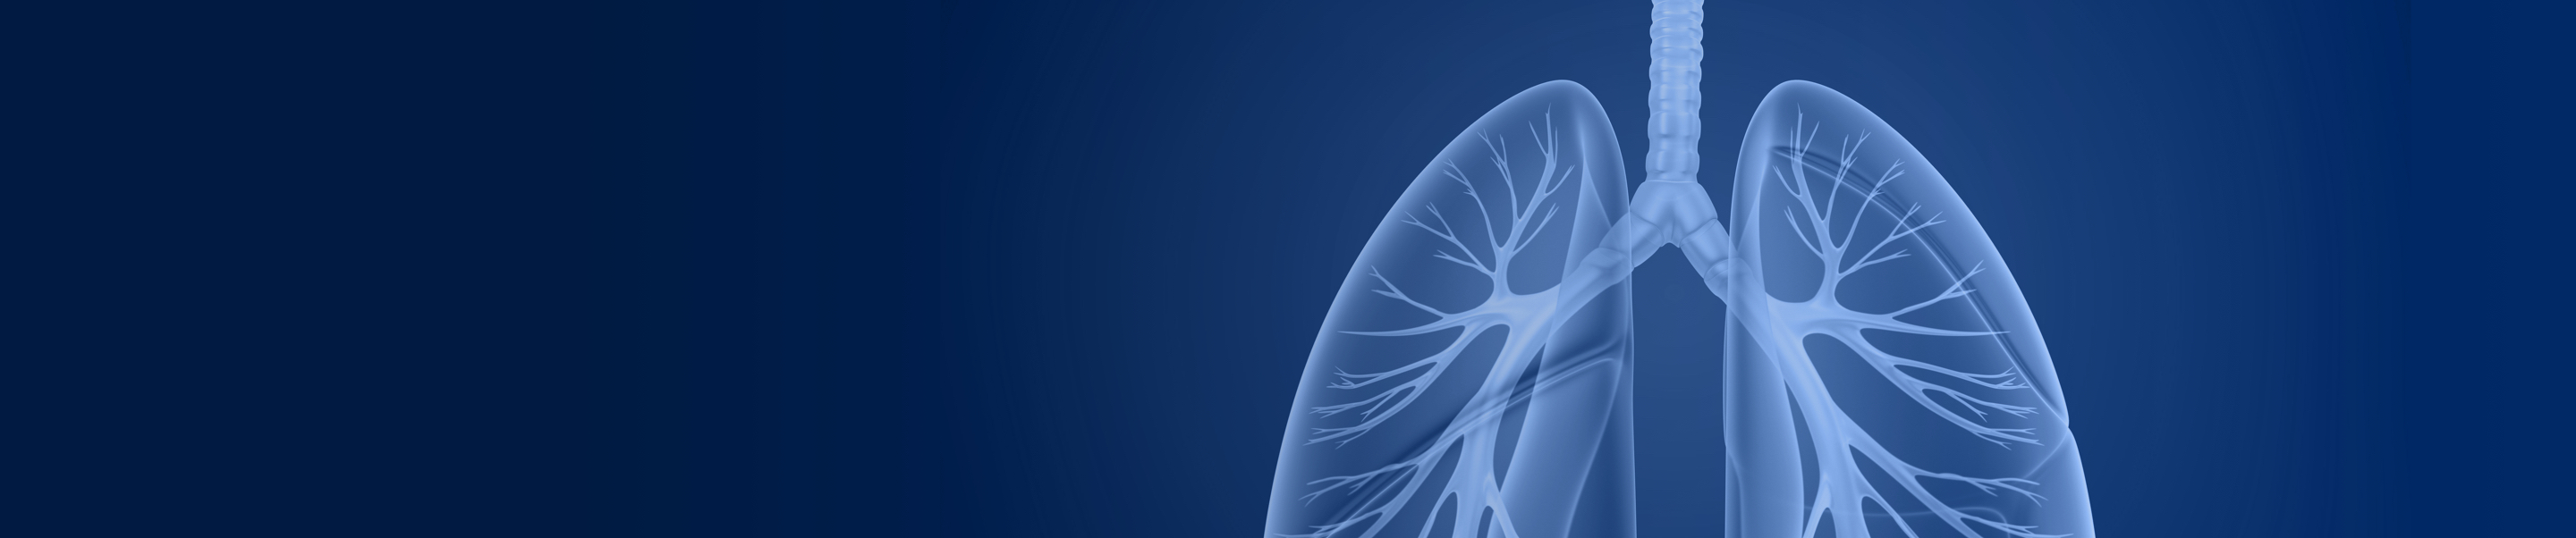 Banner image of white lungs on blue backround